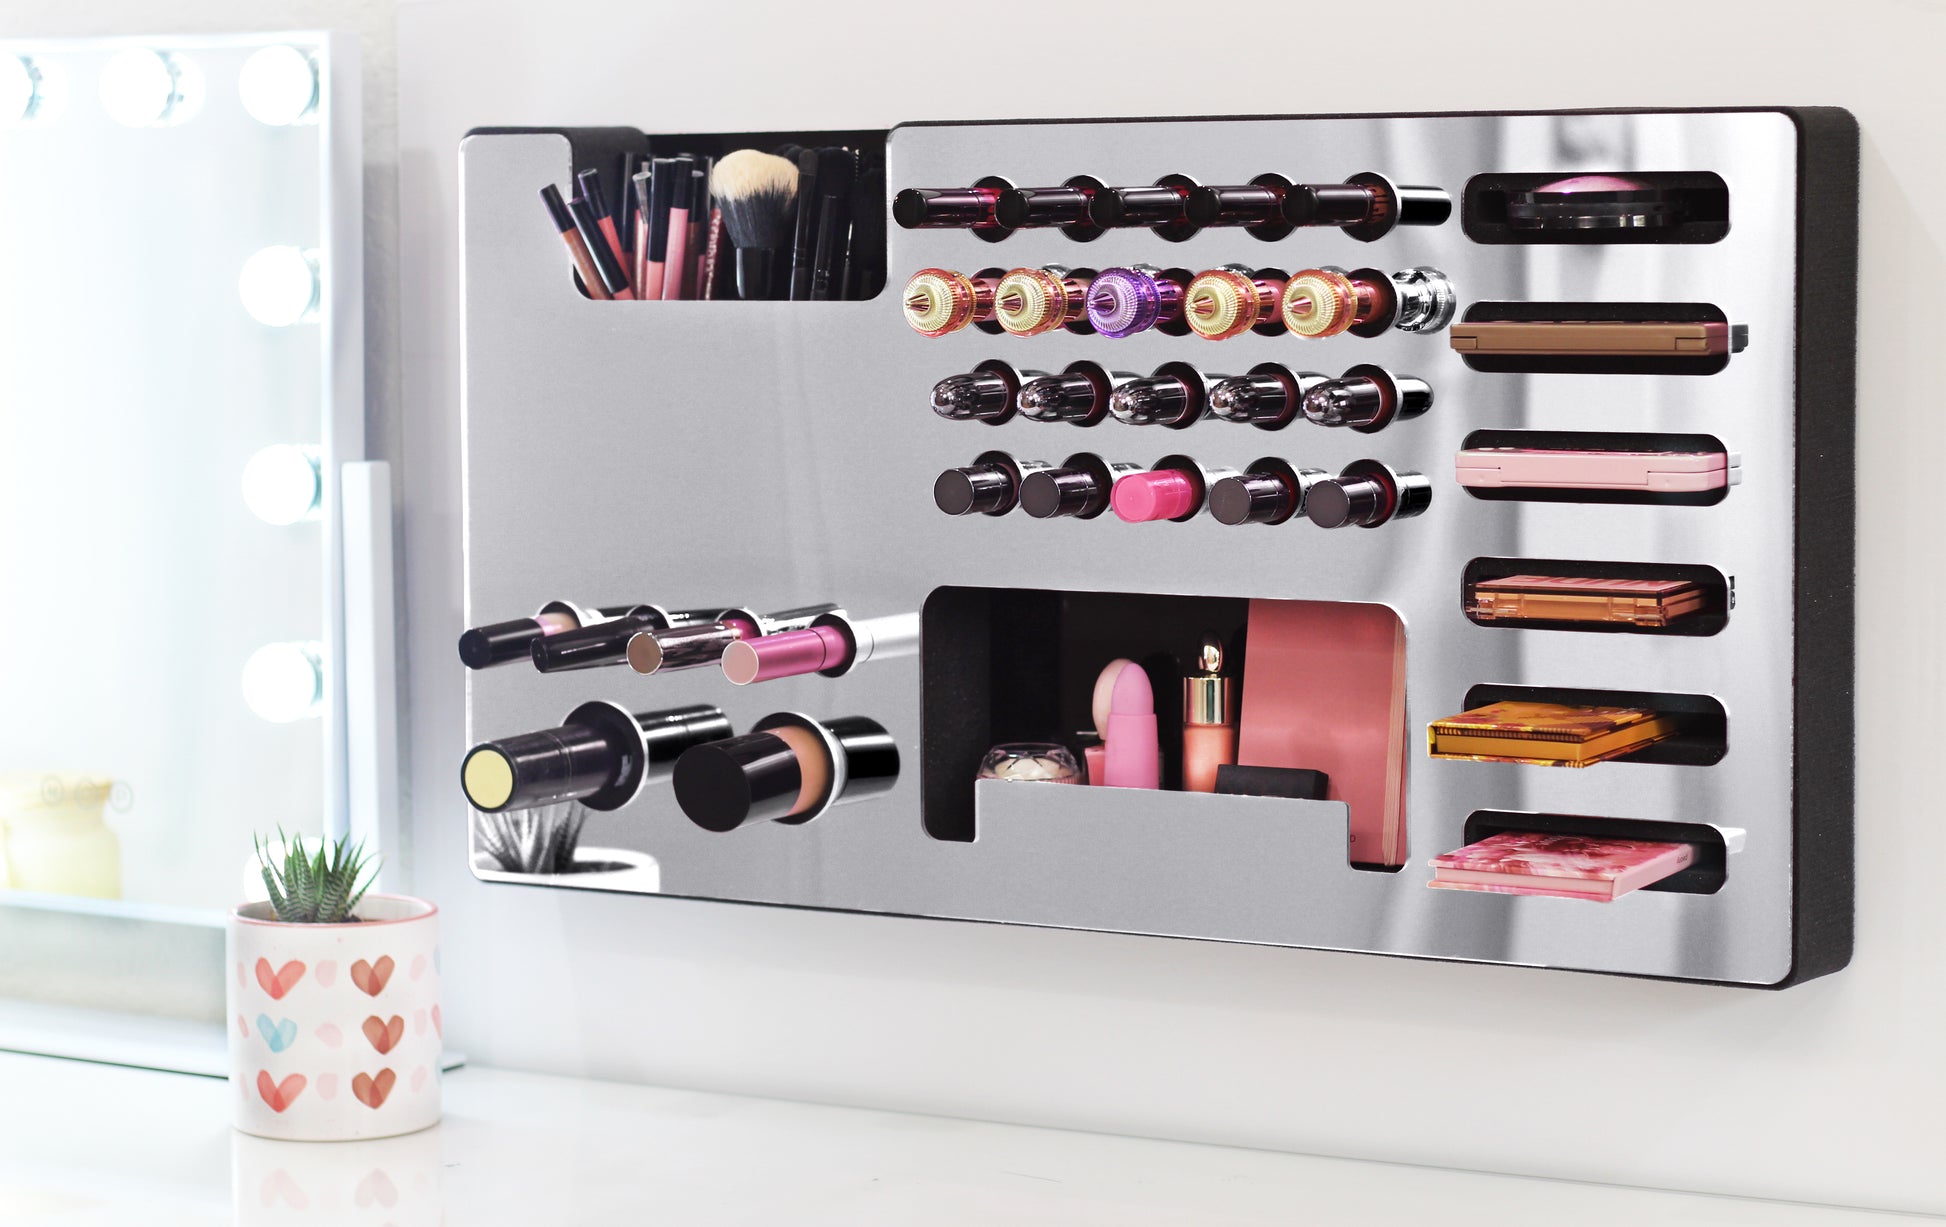 Mirror Silver Ultra Complete Makeup Solution Organizer shown mounted on the wall holding lipsticks, lip glosses, nail polishes, brushes, sunglasses and more by keeping items accessible and off of the counter. Shown next to a makeup vanity with samples of suggested items the organizer can hold. Tilted to the left to show depth.